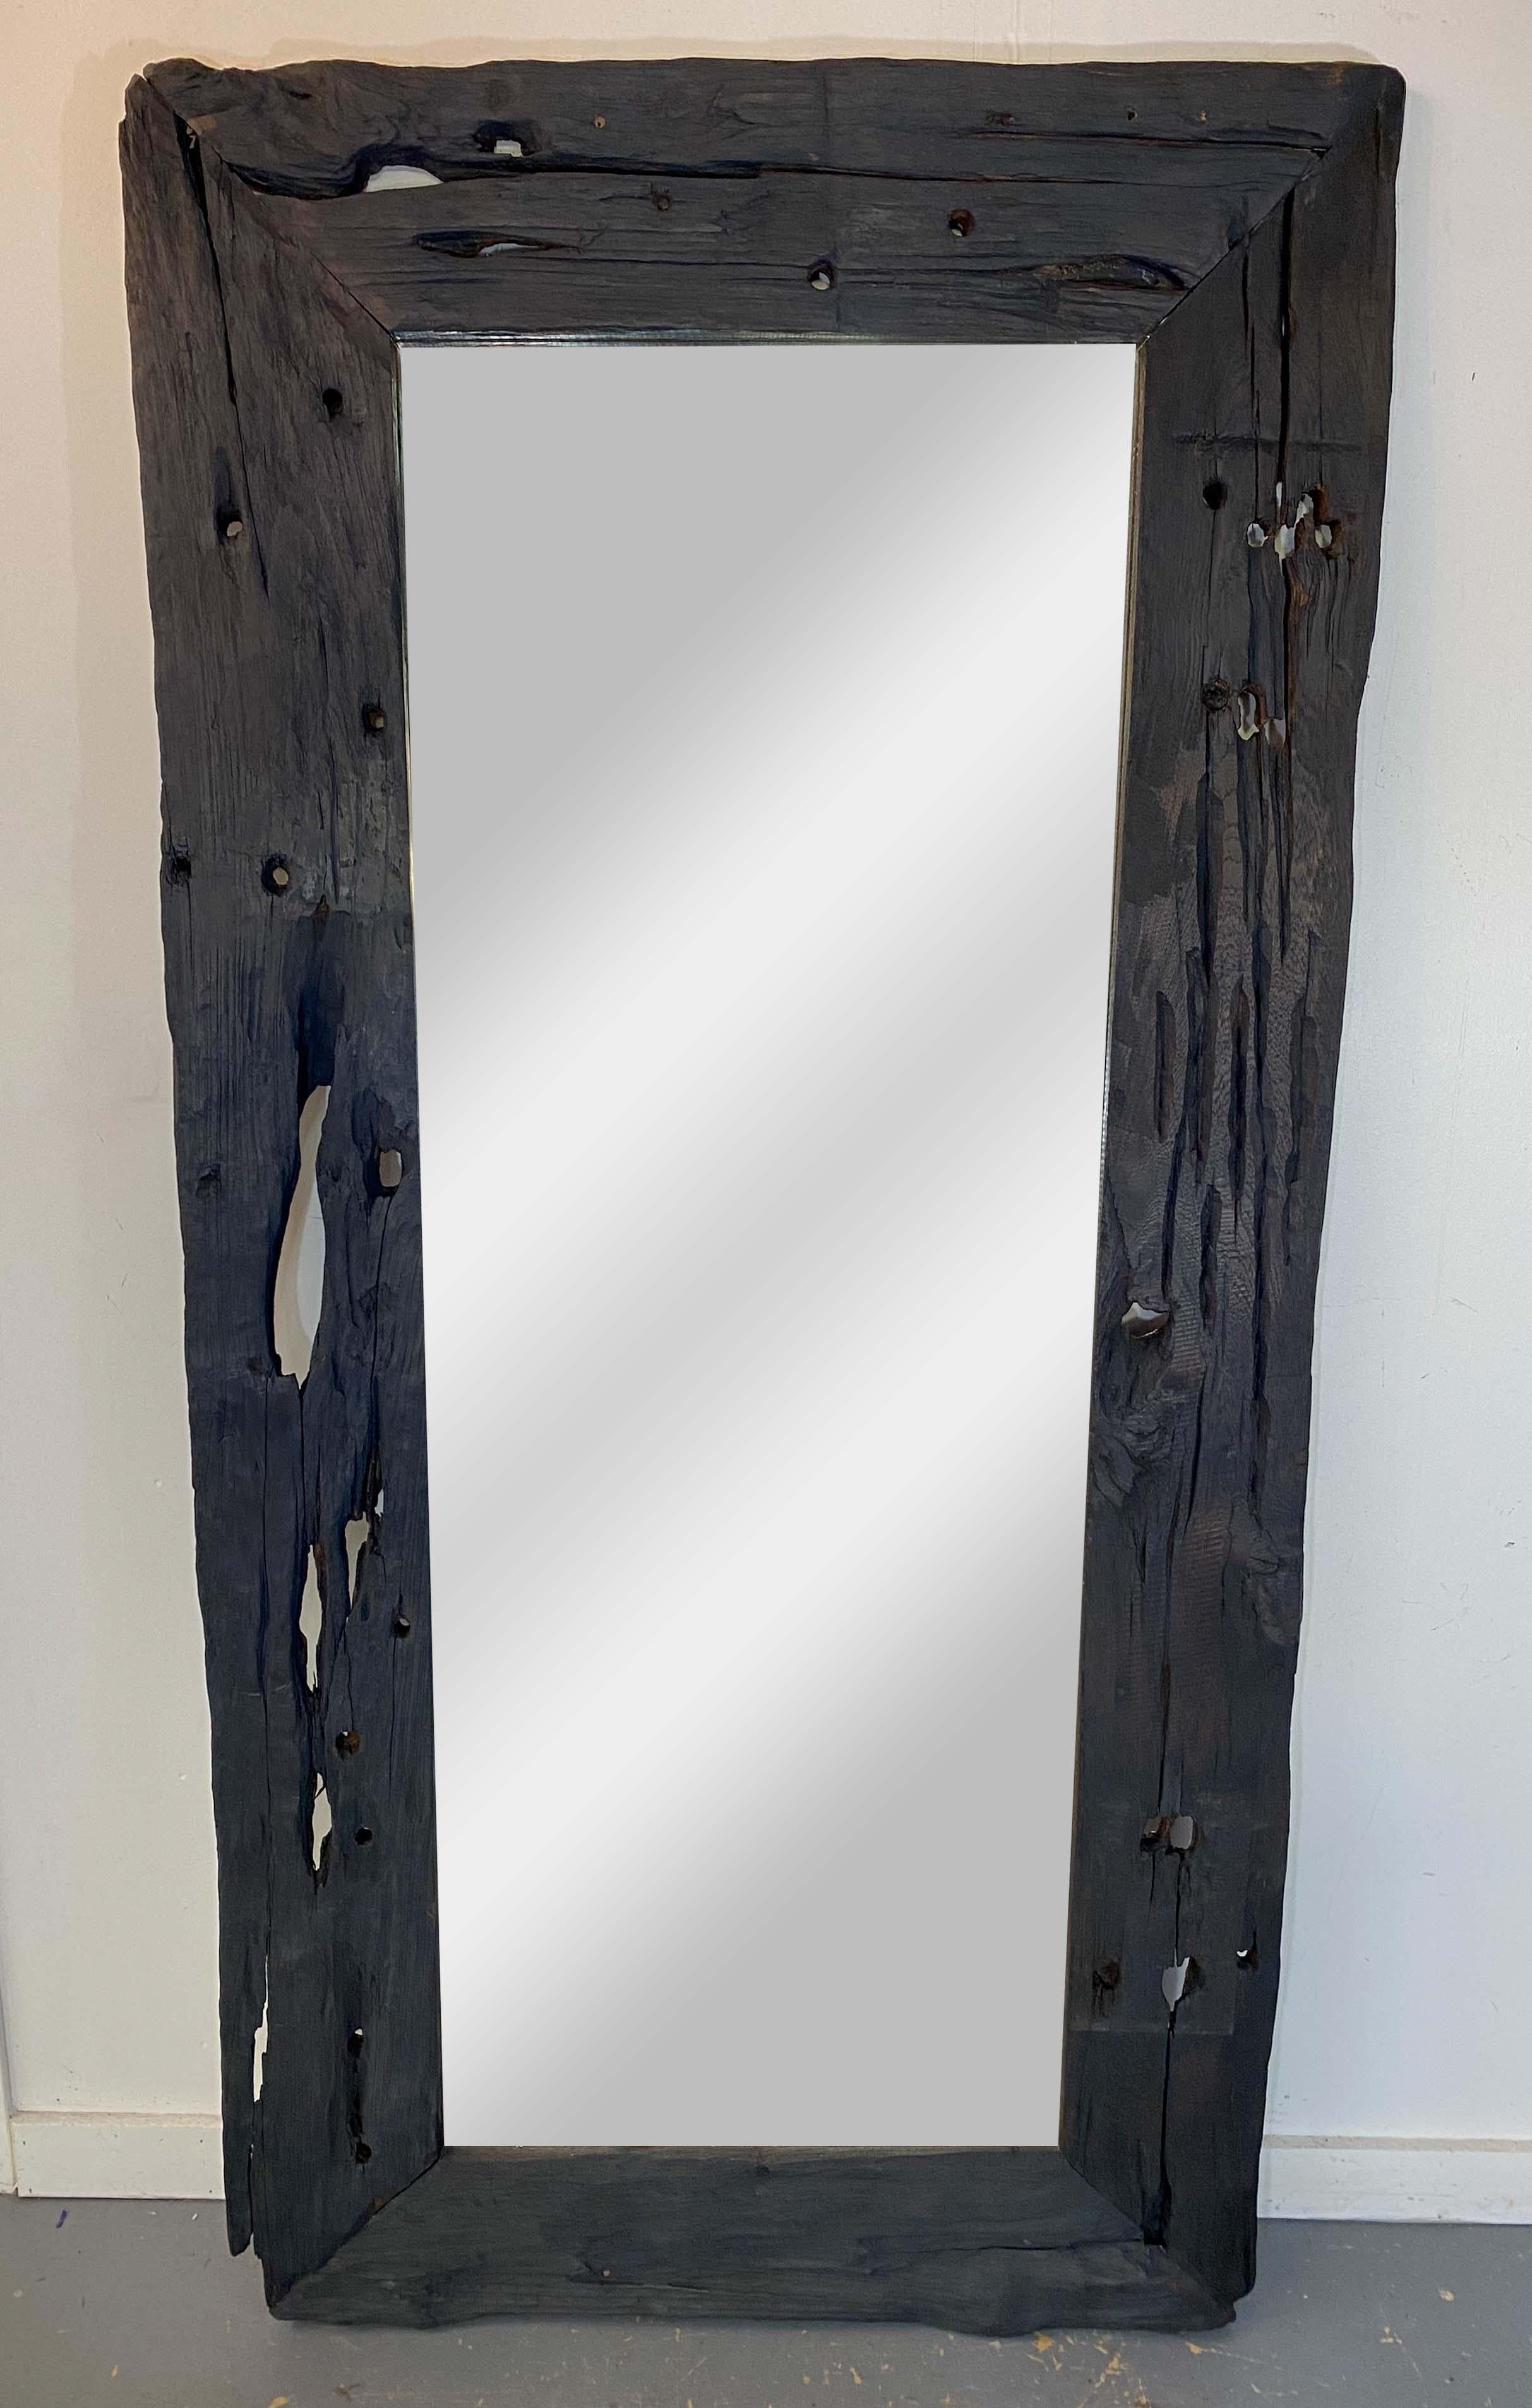 A stylish monumental modern rustic style floor mirror. The stylish mirror is beautiful hand carved of organic wood and shows natural shapes and design adding to its organic flair. The mirror is study and features an onyx , dark gray color. The